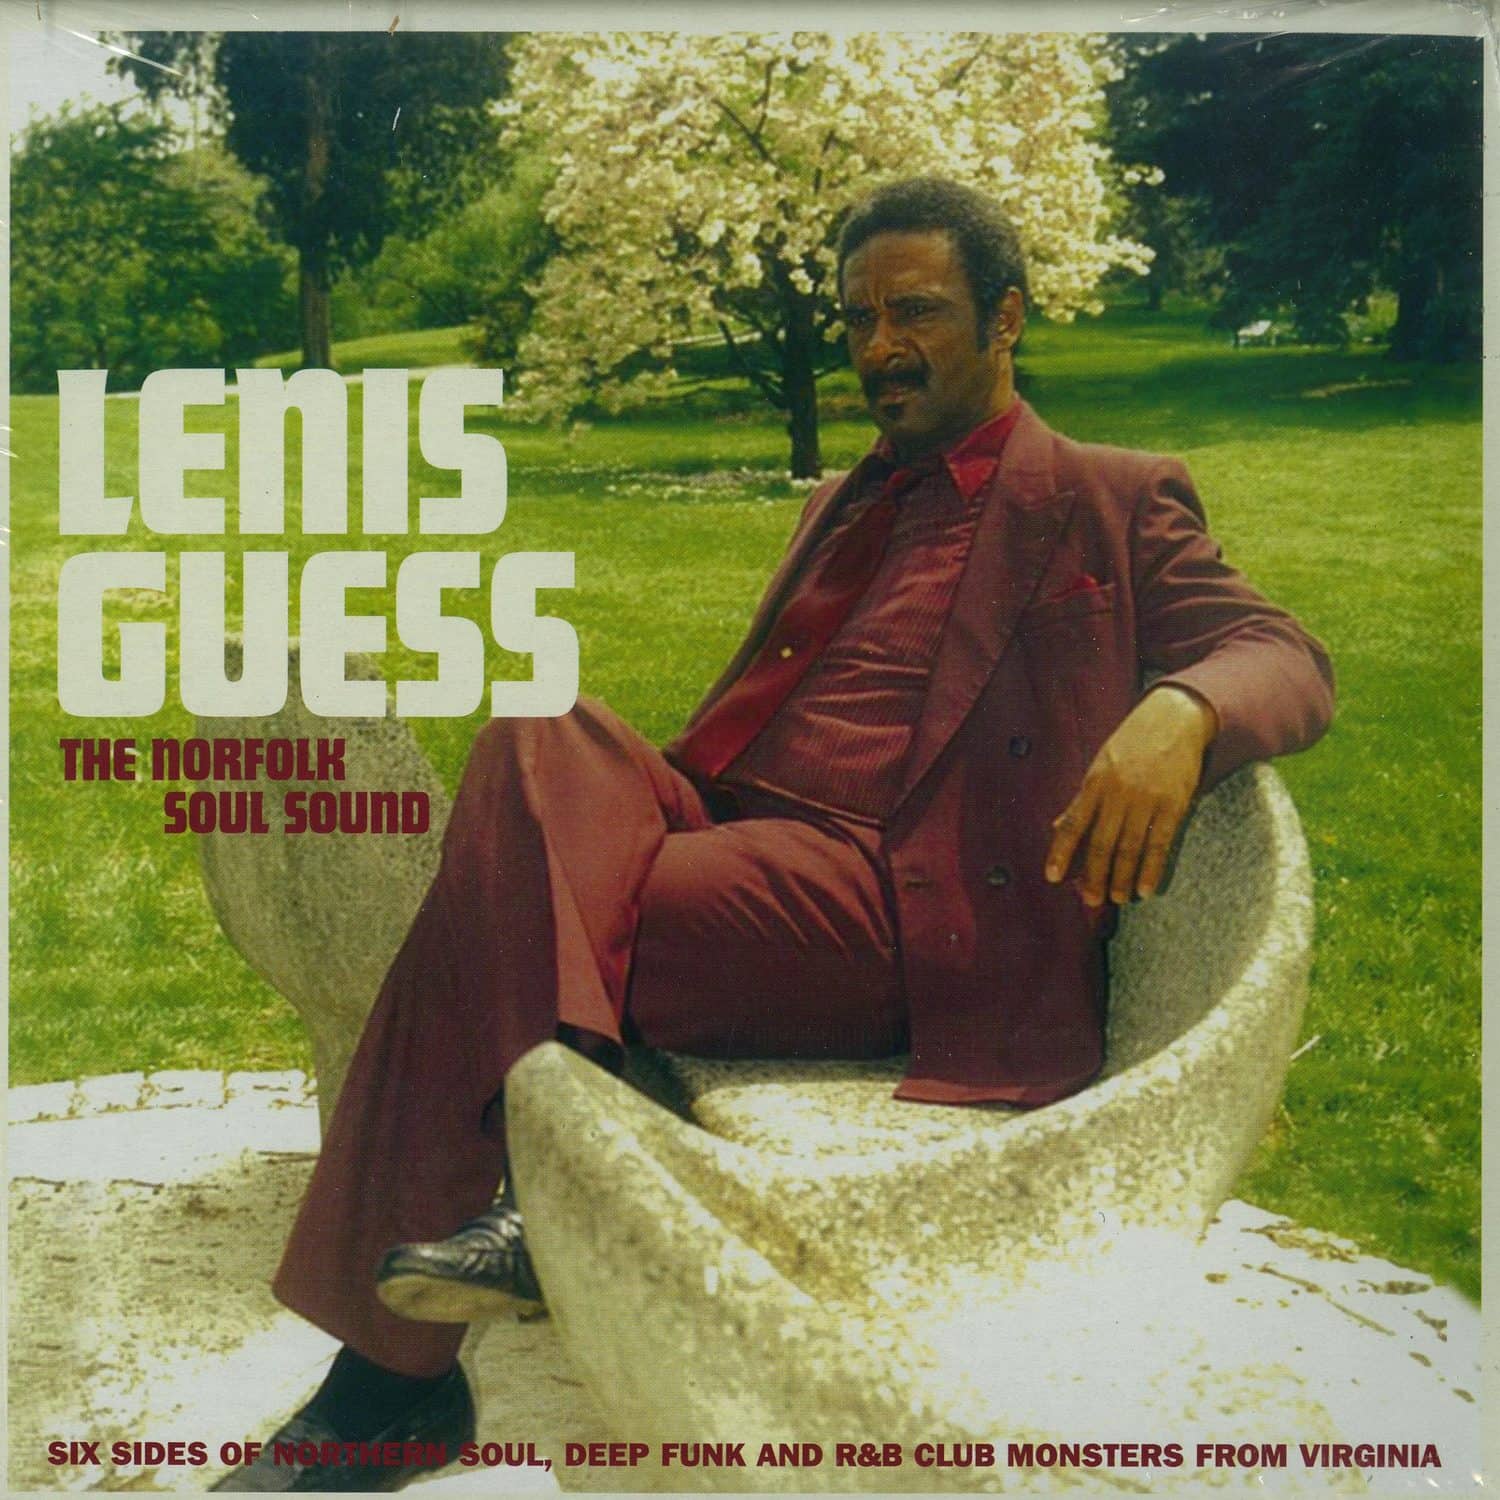 Lenis Guess - THE NORFOLK SOUL SOUND 